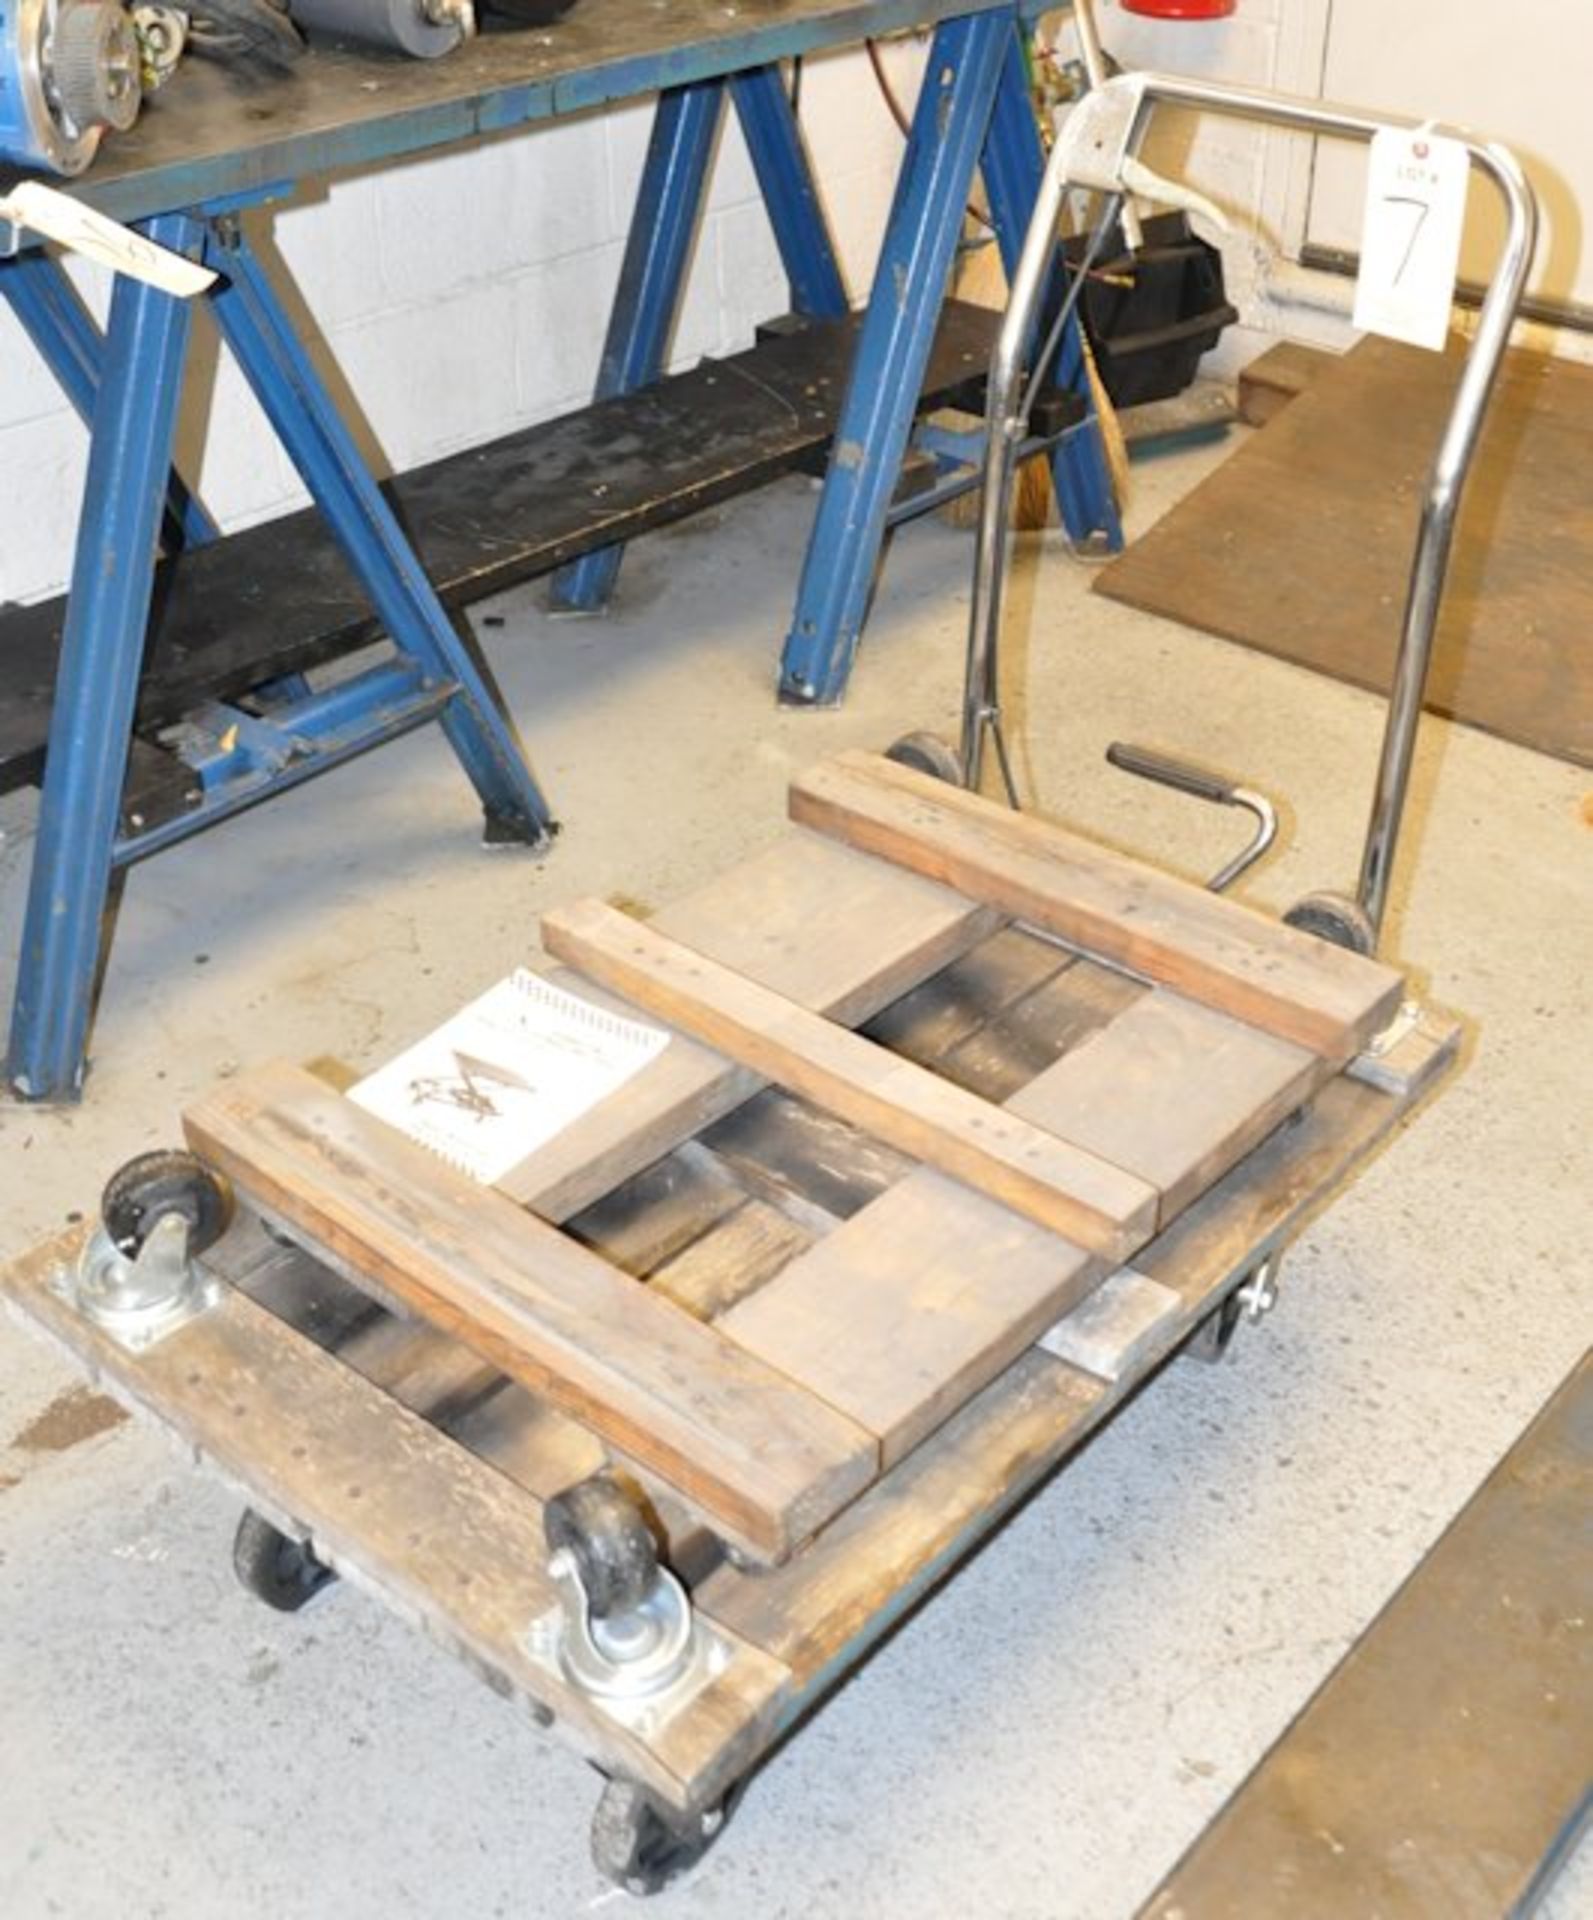 Lot-(1) Foot-Operated Lift Cart and (2) Wooden 4-Wheel Dollies